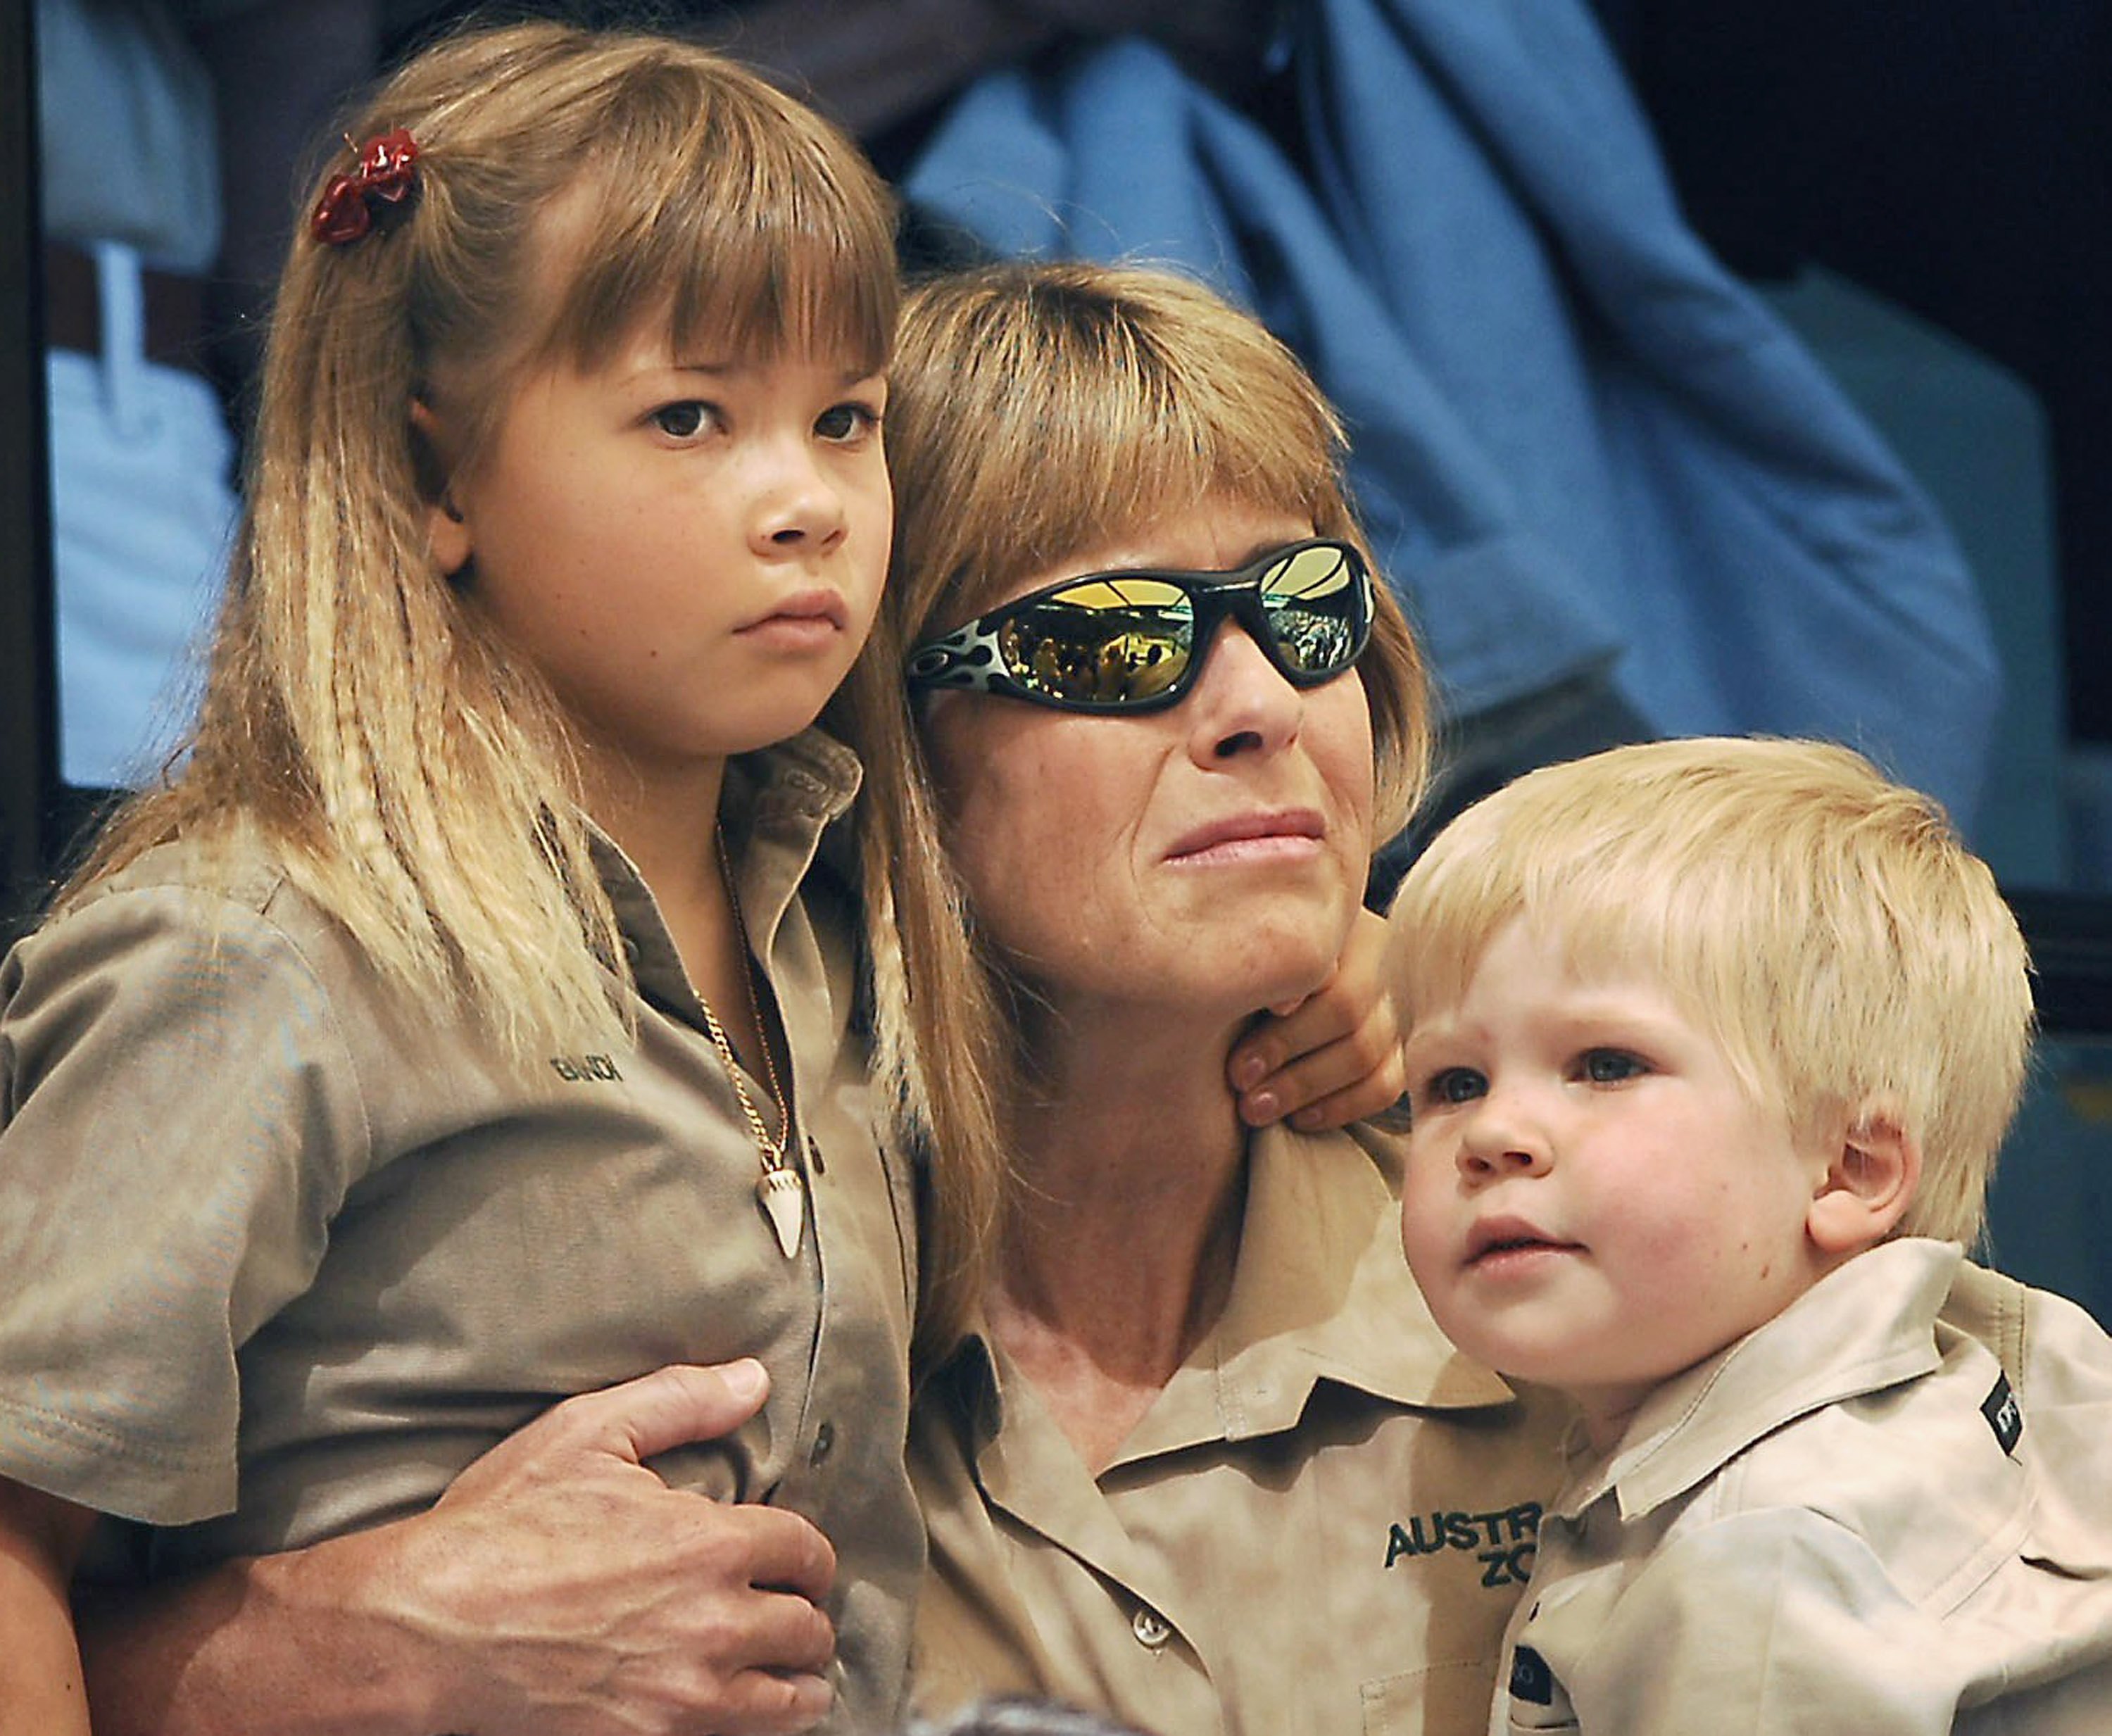 Terri Irwin and her children Bindi and Bob attend a memorial service for Steve Irwin at Australia Zoo on September 20, 2006, in Beerwah, Australia | Source: Getty Images